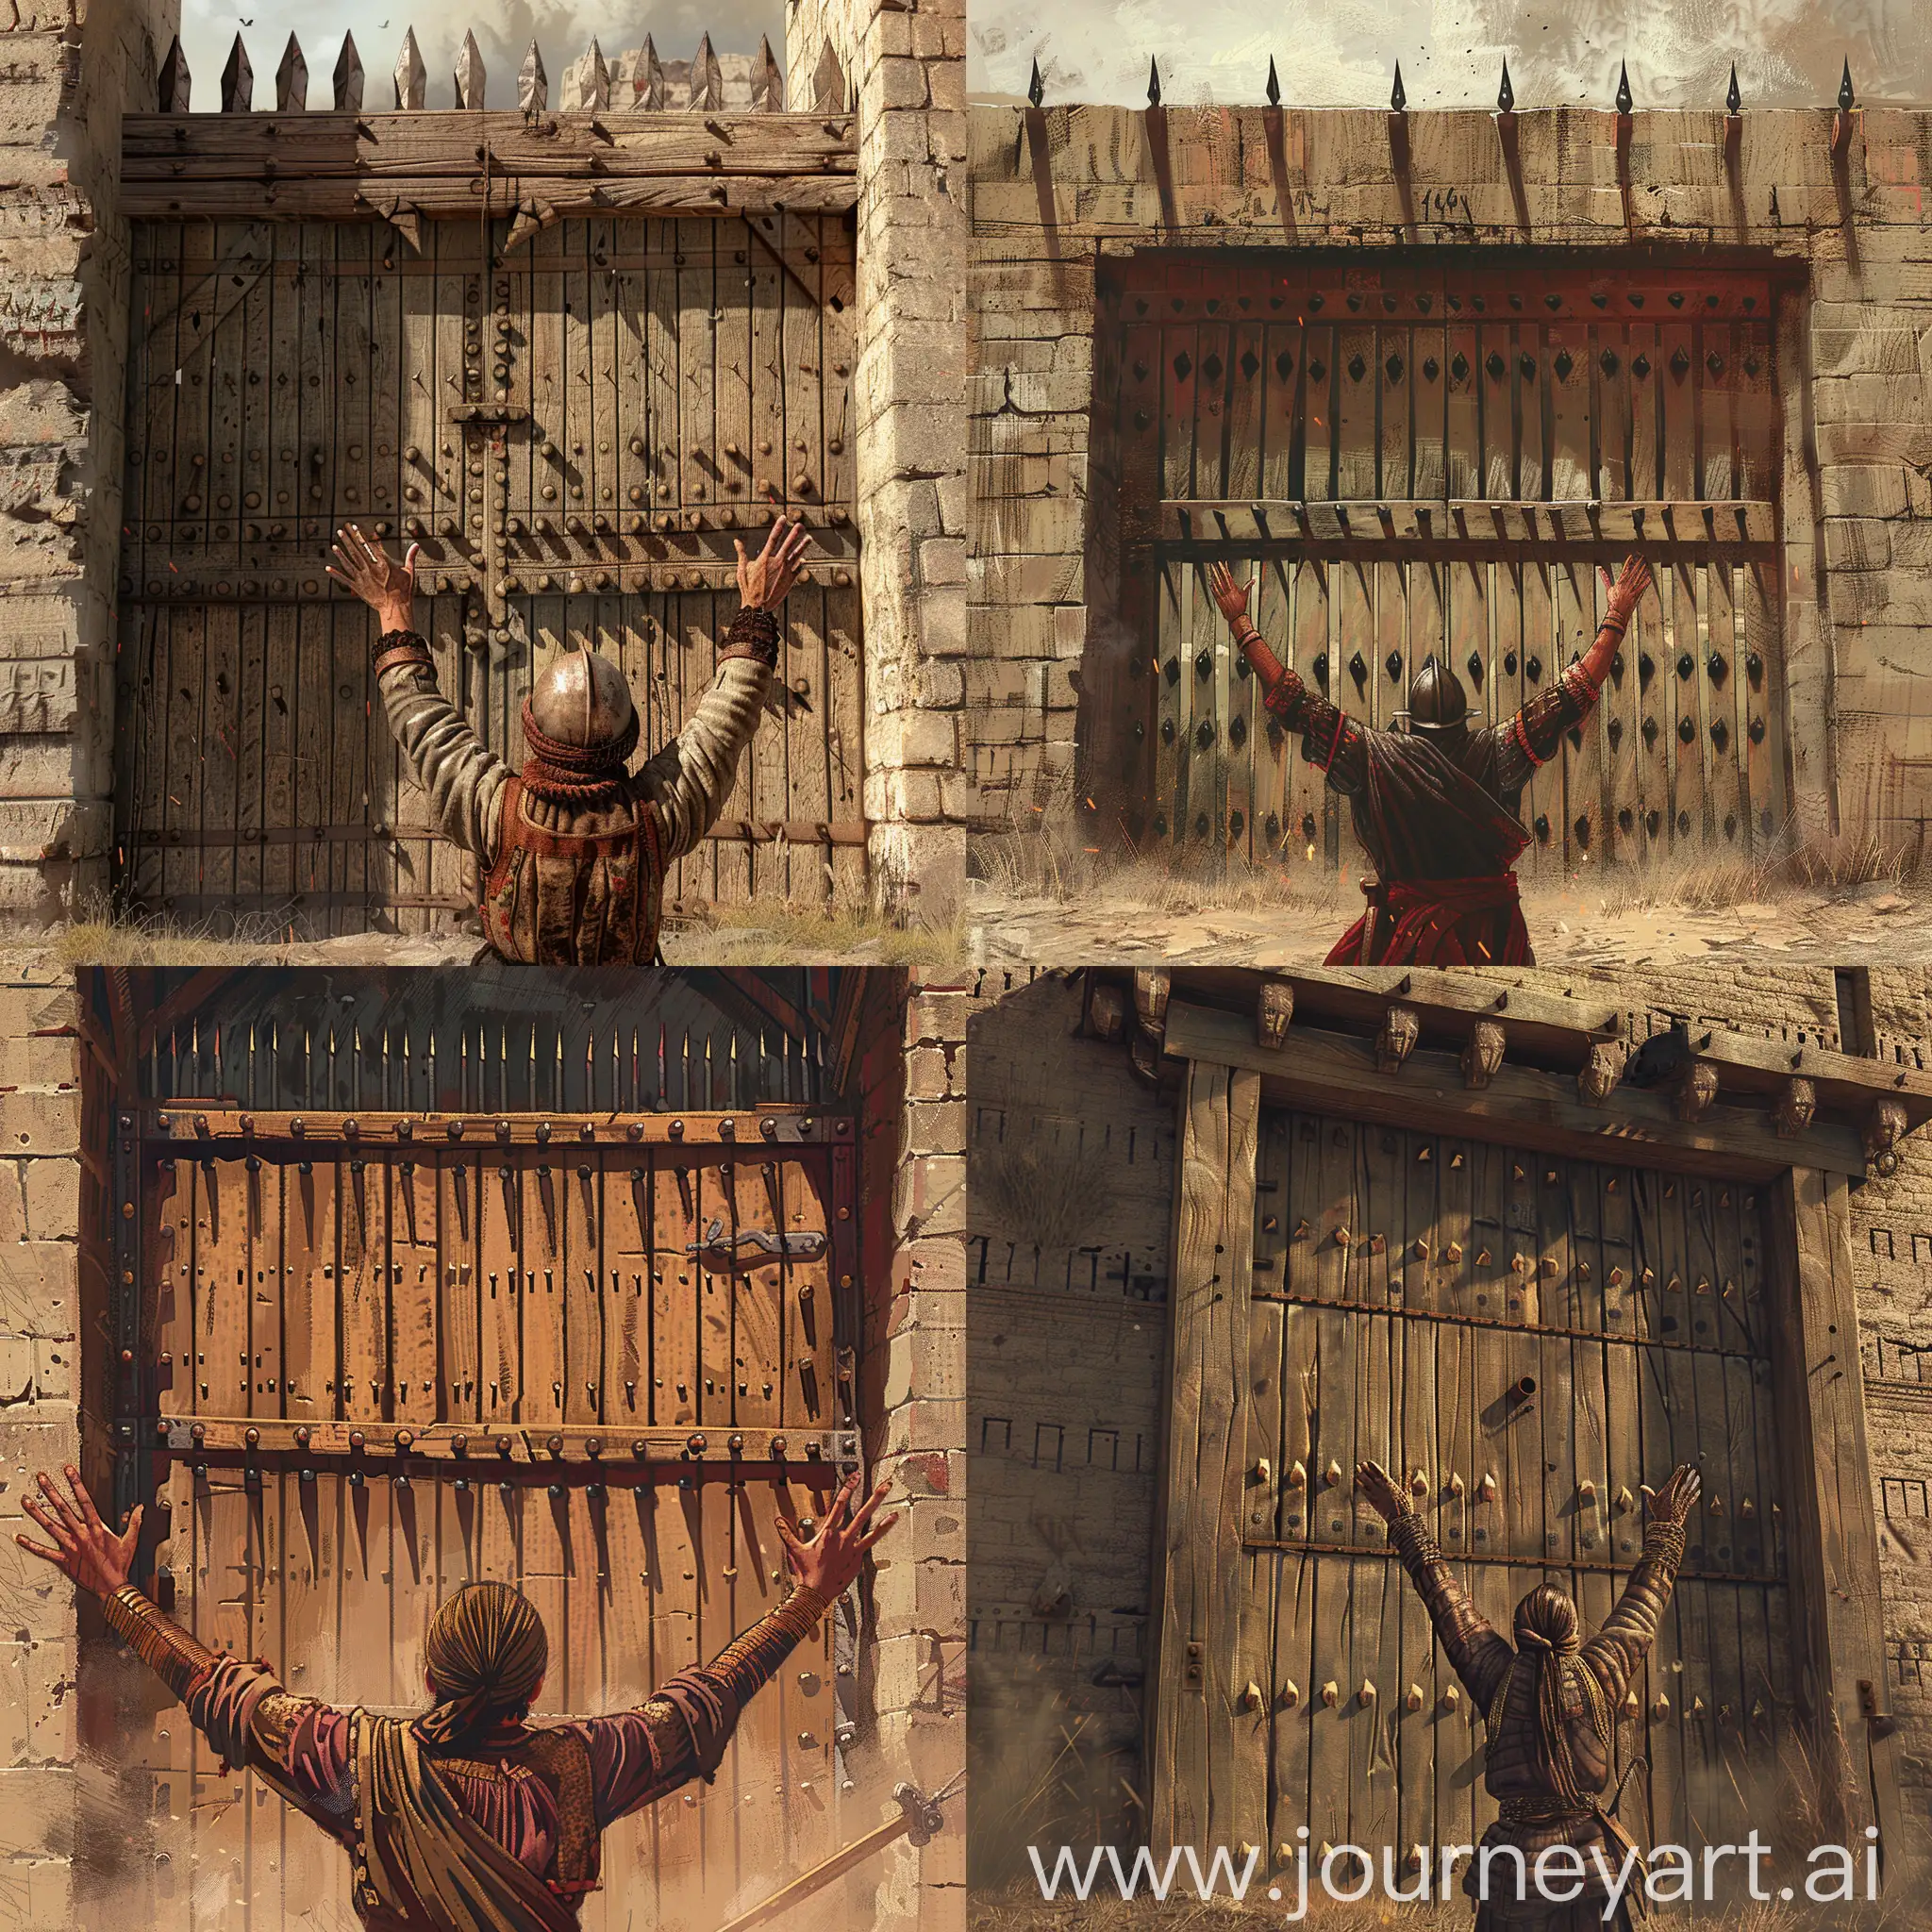 Rajput-Soldier-Surrendering-at-Fort-Gate-with-Spiked-Defenses